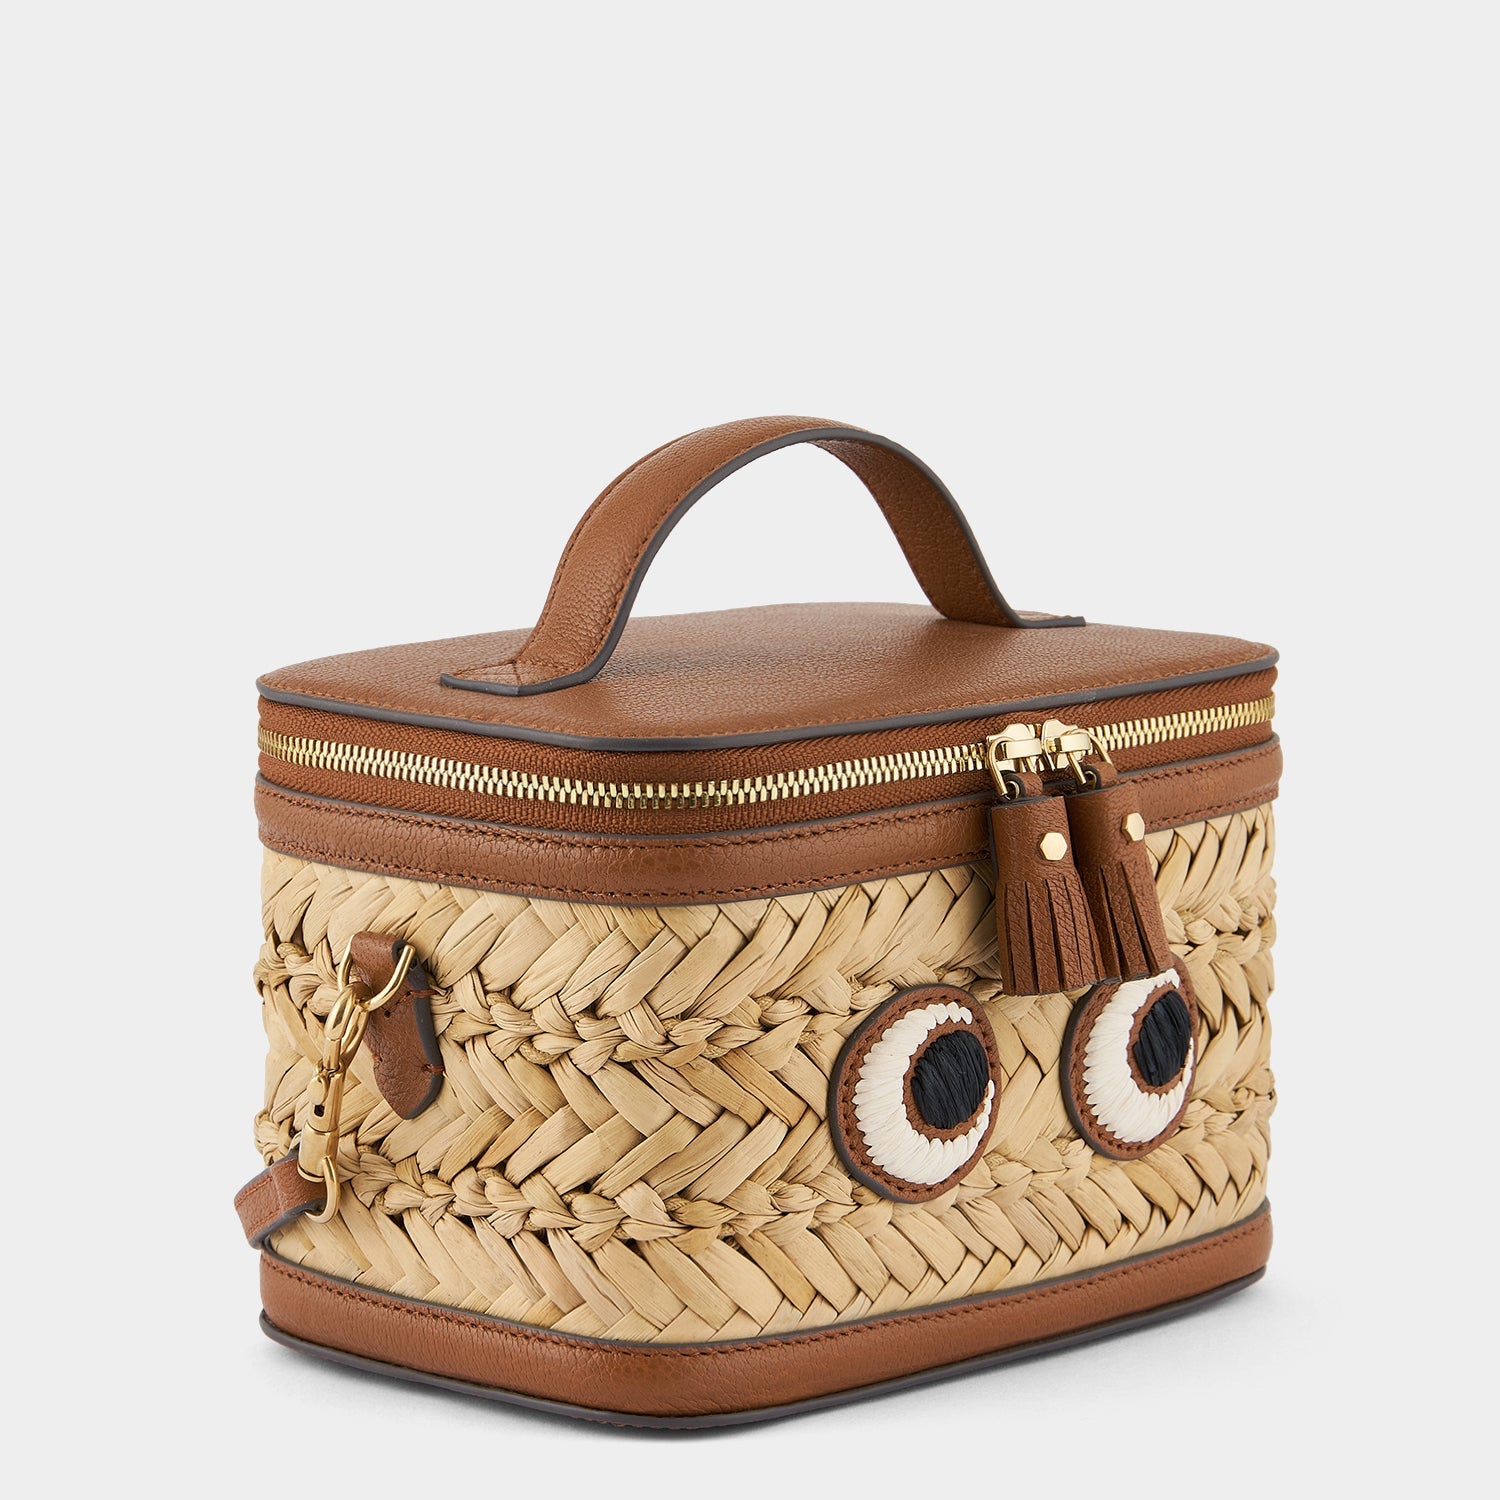 Bits and Bobs Eyes Cross-body -

                  
                    Seagrass and Capra Leather -
                  

                  Anya Hindmarch US
